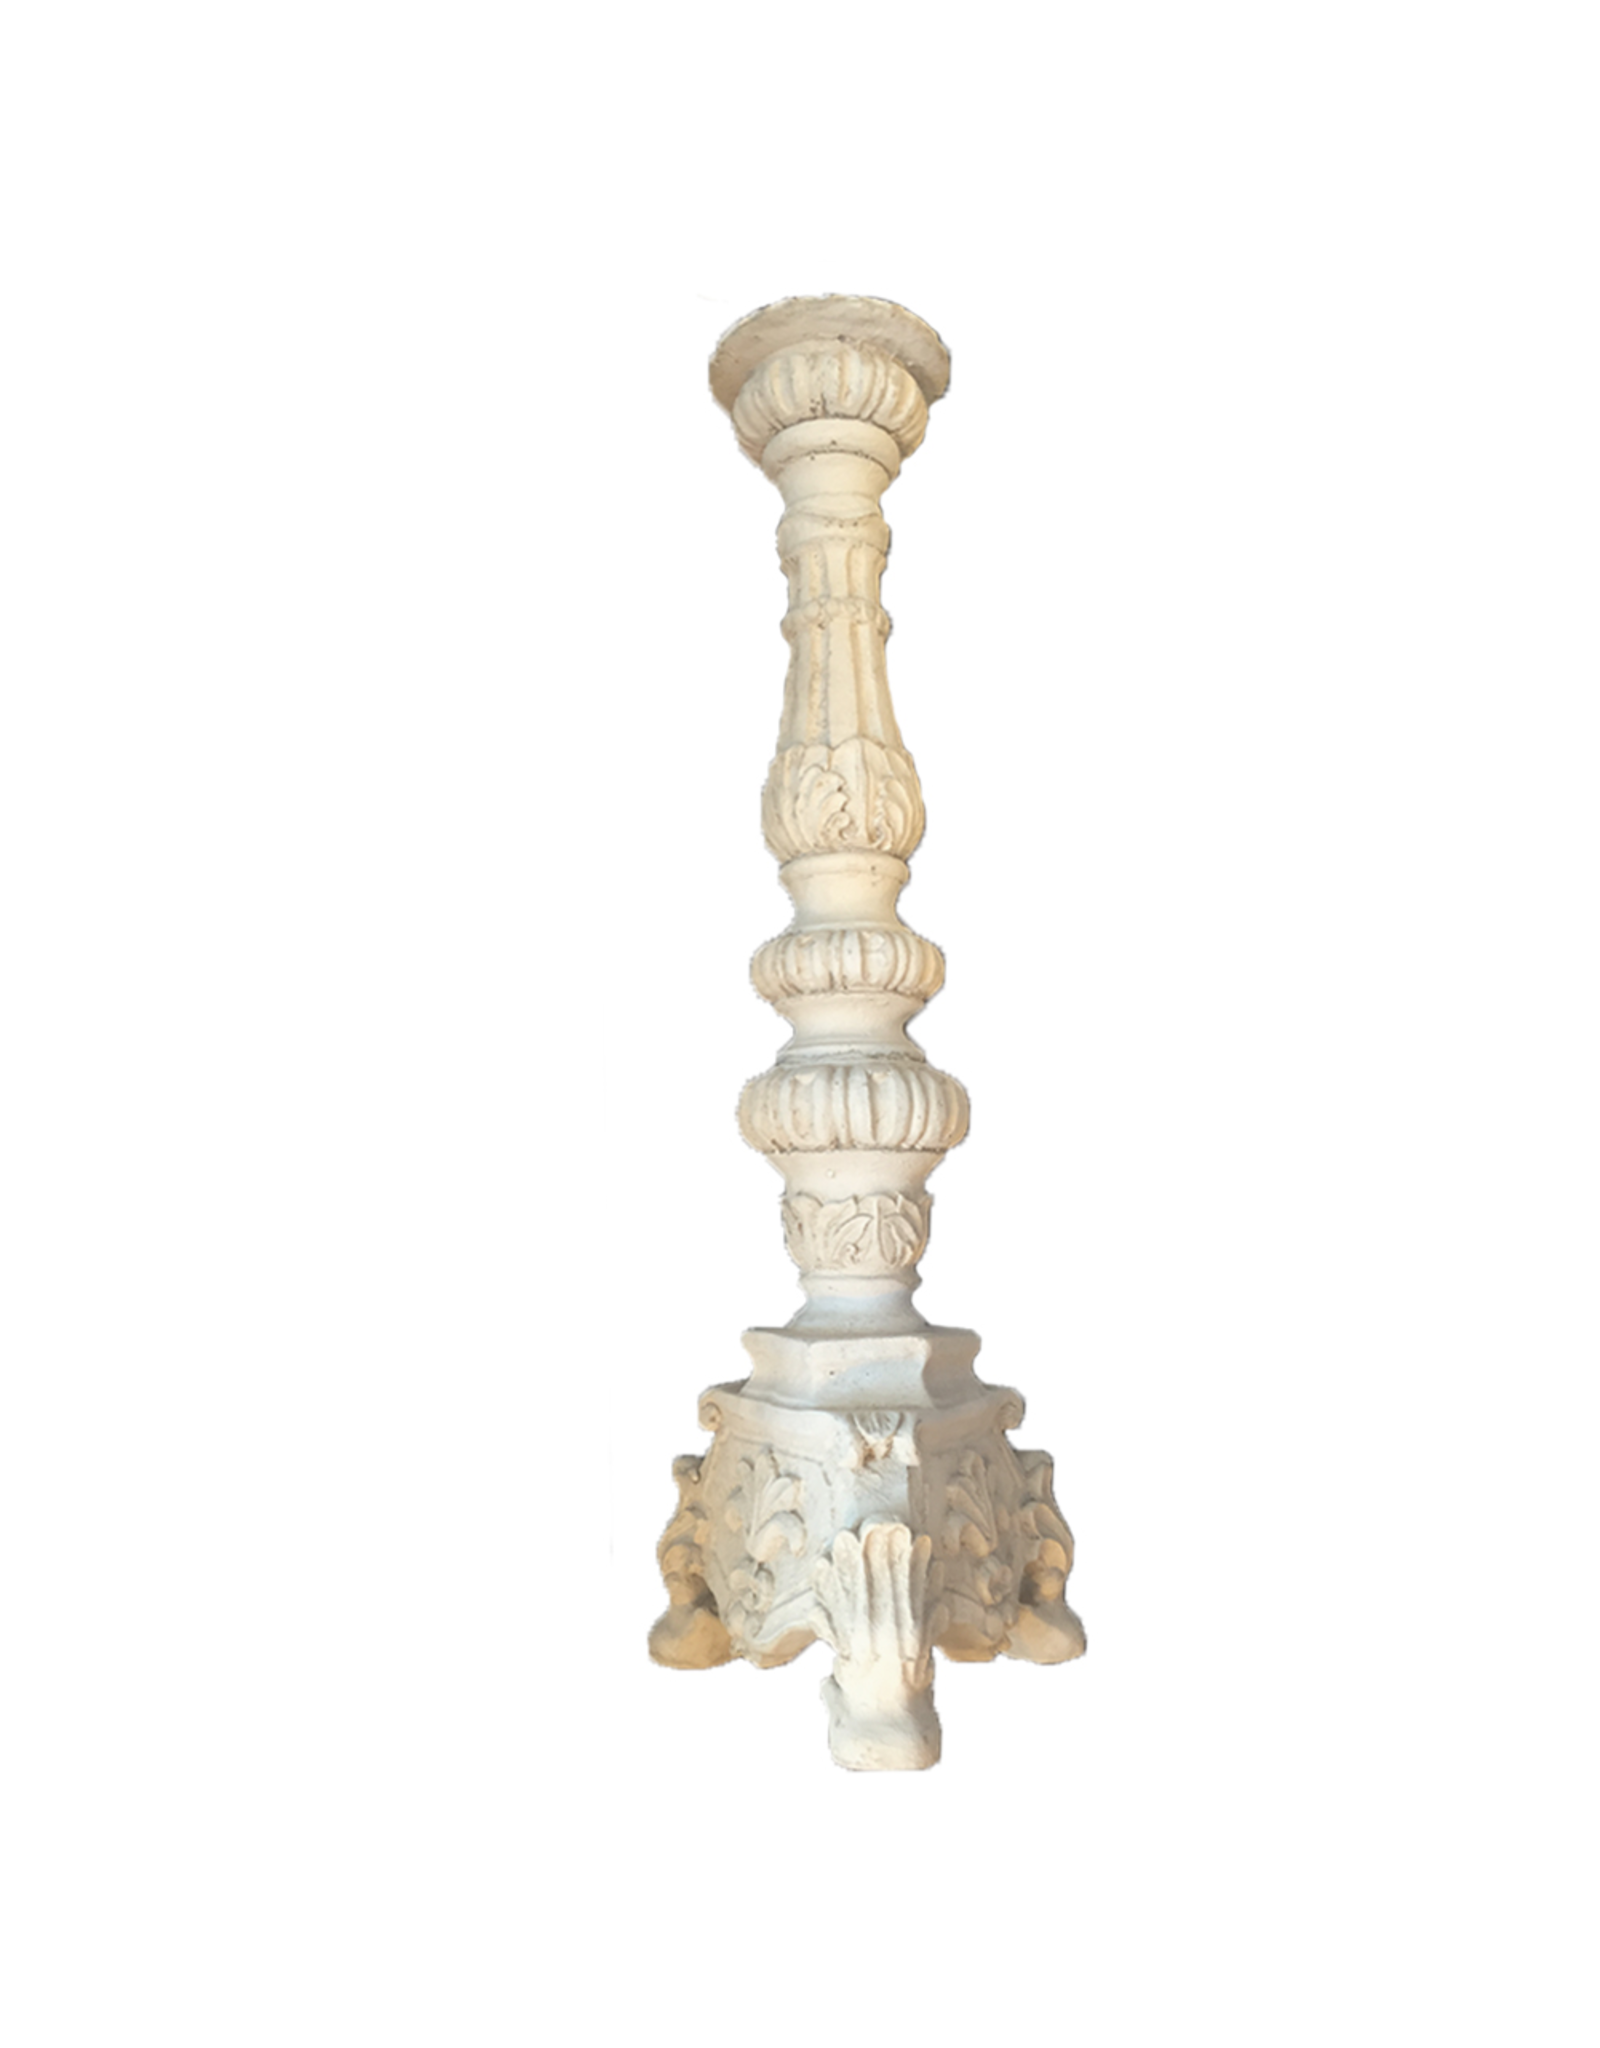 DIGS-N-GIFTS Tall Candlestick 25H inch Decorative Rustic Pillar Candle Holder